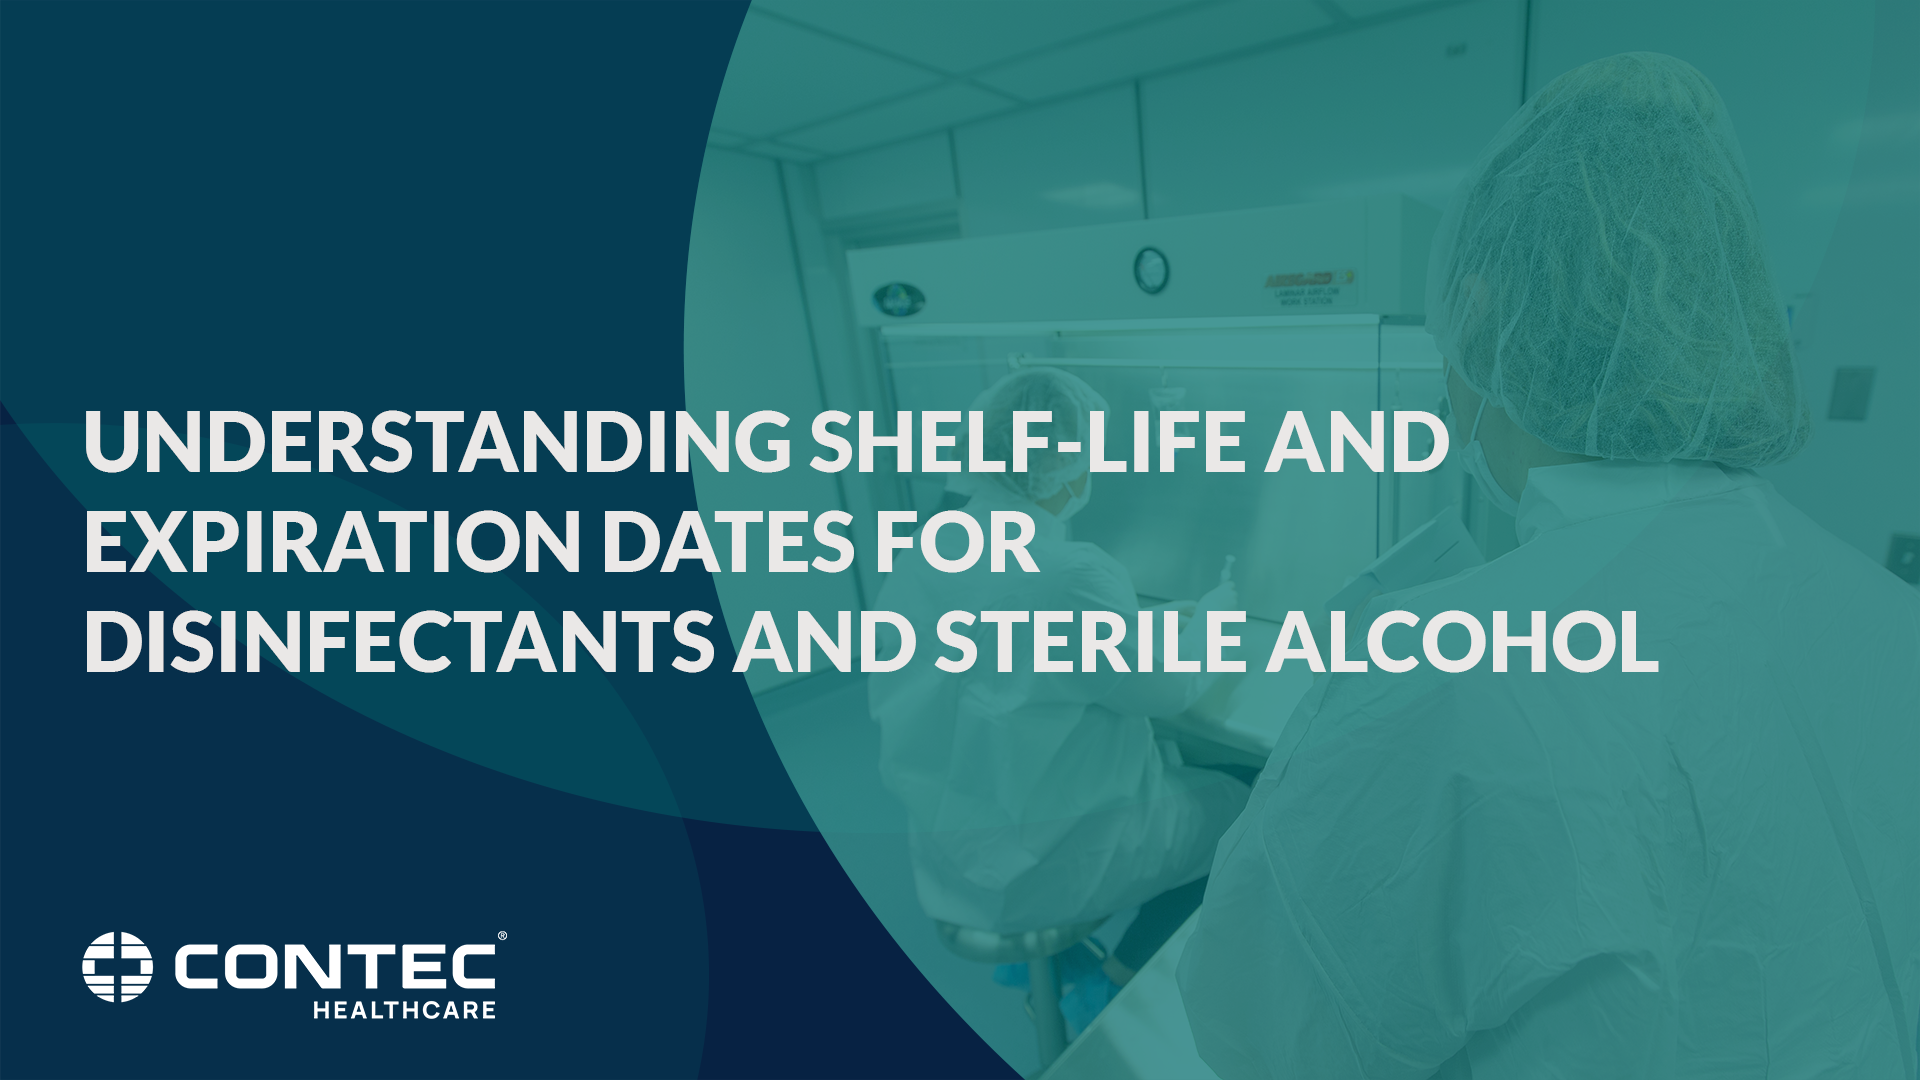 Image of Understanding Shelf-life and Expiration Dates for Disinfectants and Sterile Alcohol